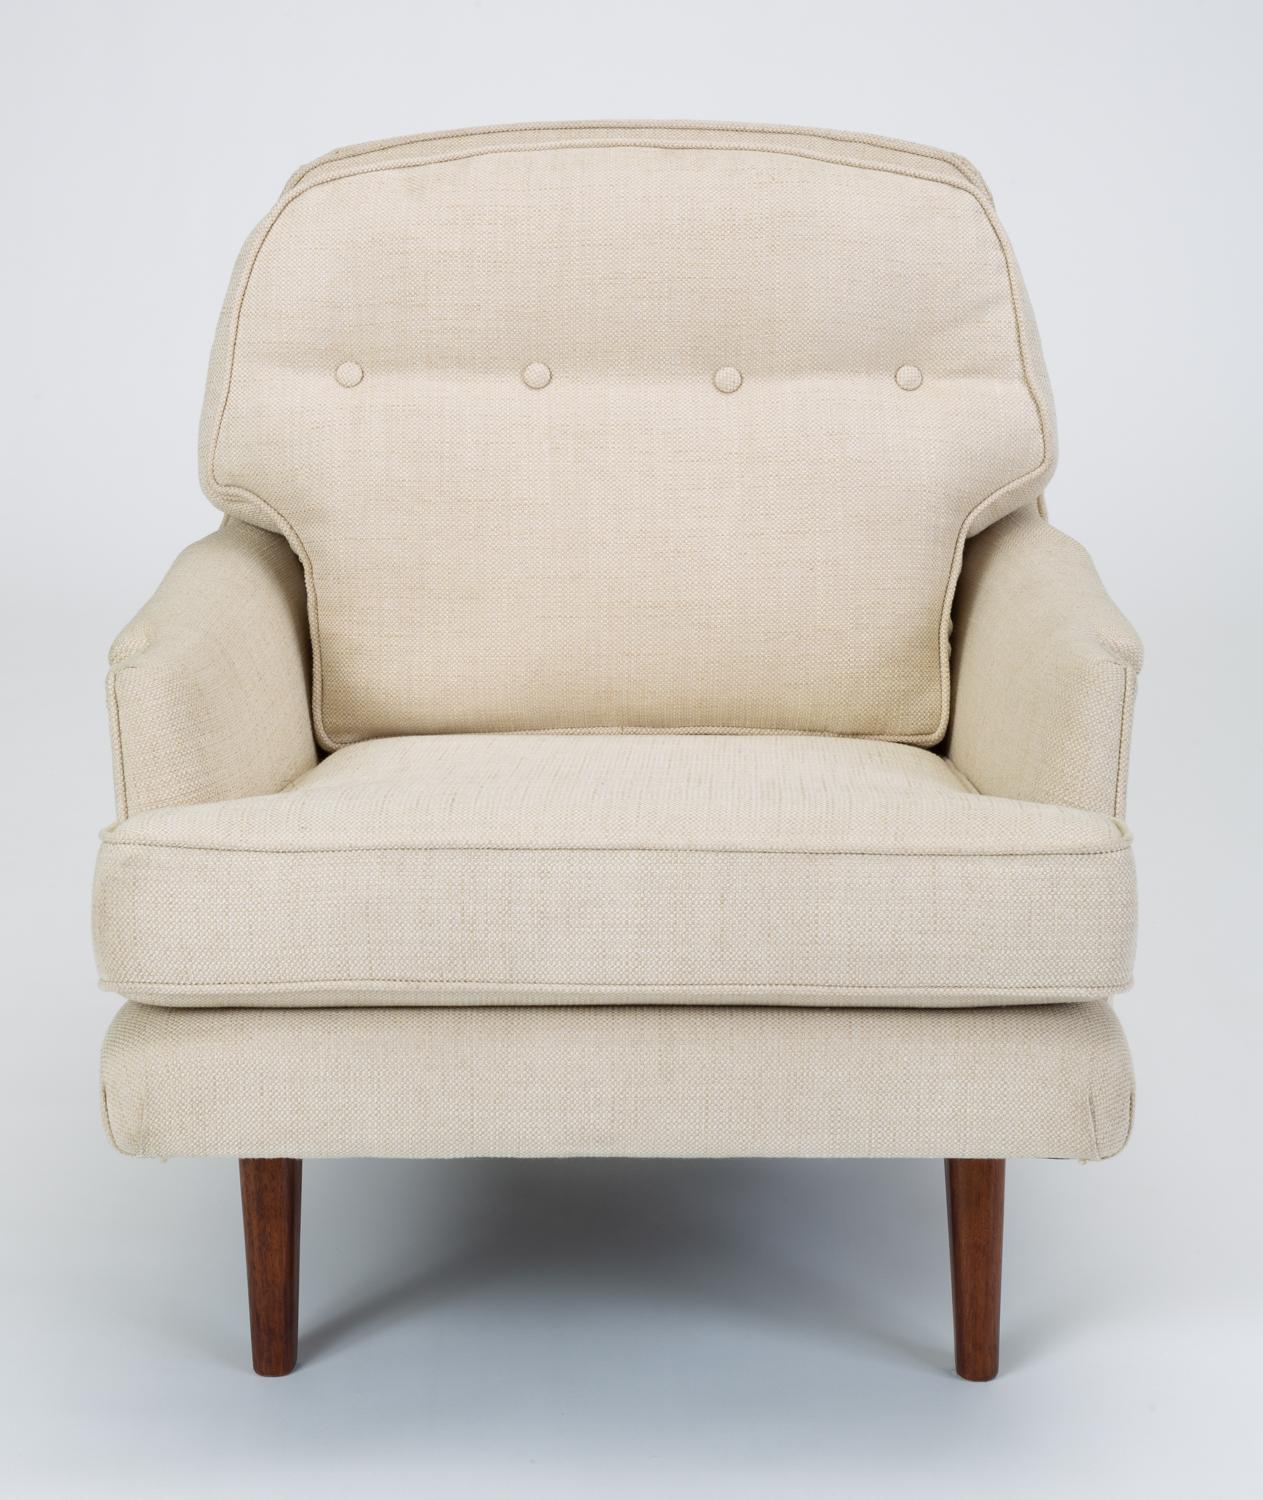 Designed by Edward Wormley’s successor at Dunbar, Roger Sprunger, the Model 484 lounge chair has a deep seat and notched armrests. The removable back and seat cushions are defined by welted seams and the back has a single row of tufting at shoulder